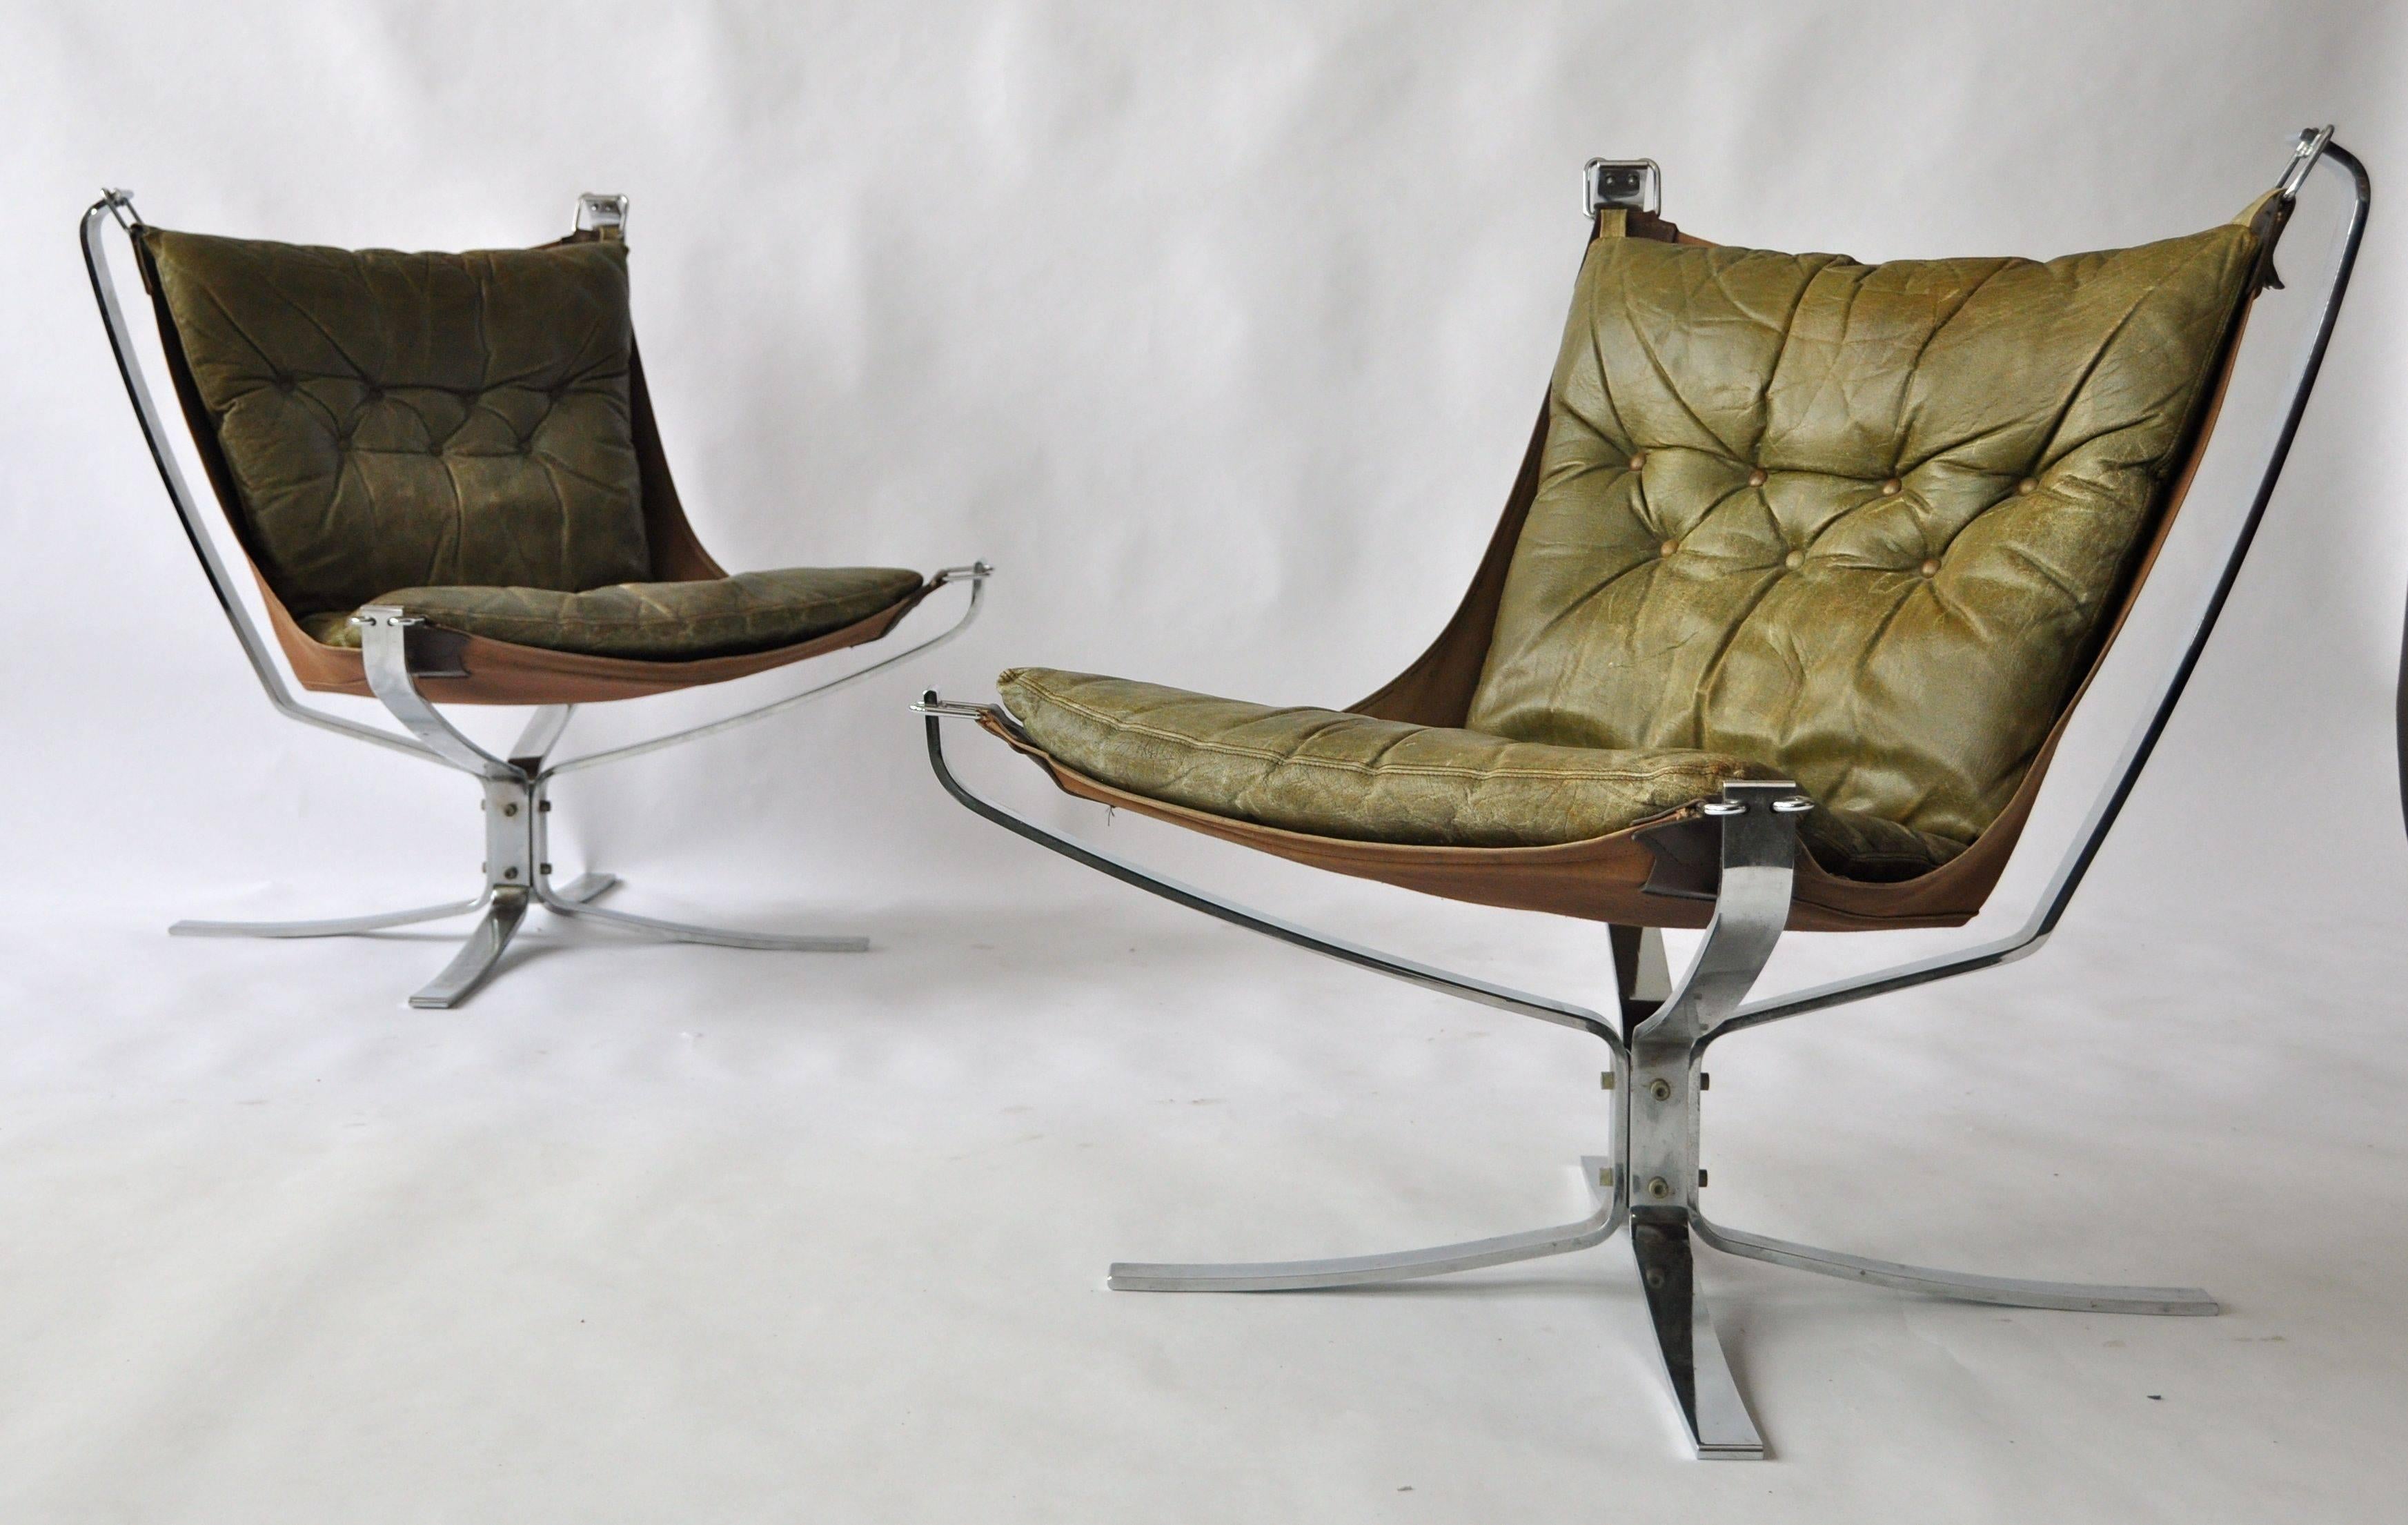 Pair of Sigurd Ressell Falcon chairs. Chrome-plated steel frame. Original vintage green leather with patina.